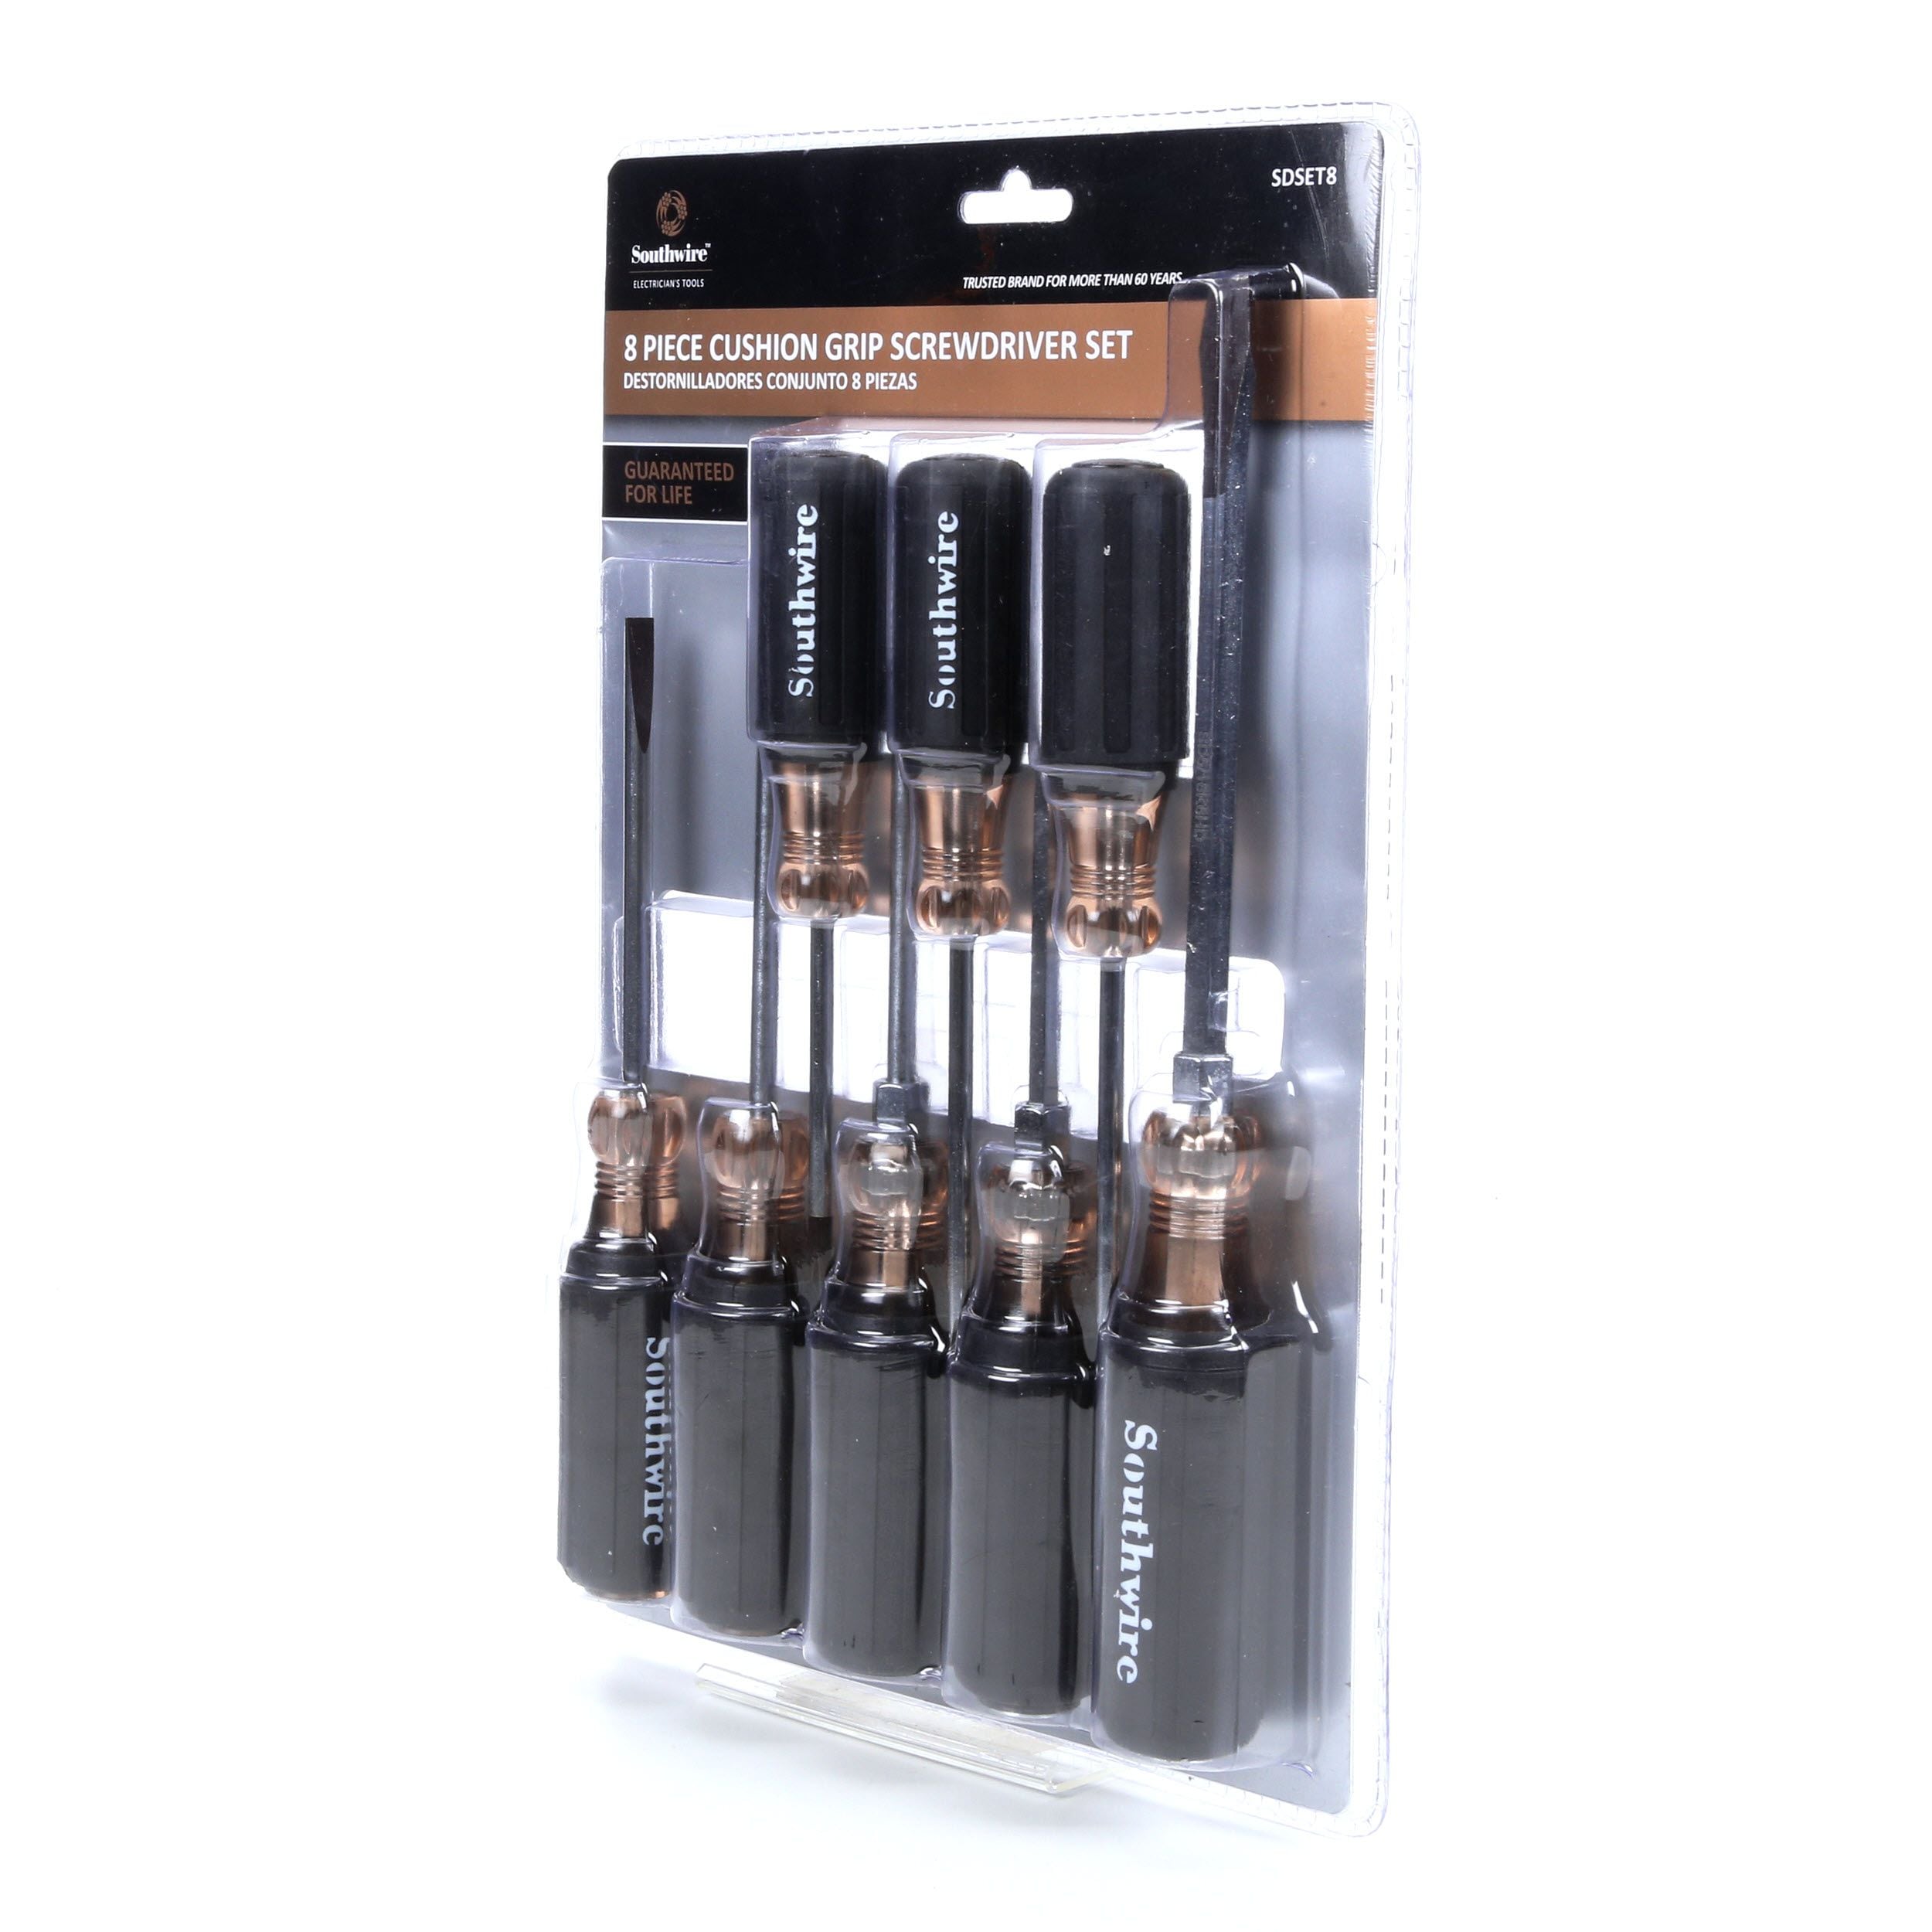 Details about   Southwire 2-pack Stubby Screwdriver Set NEW SDSET2-3